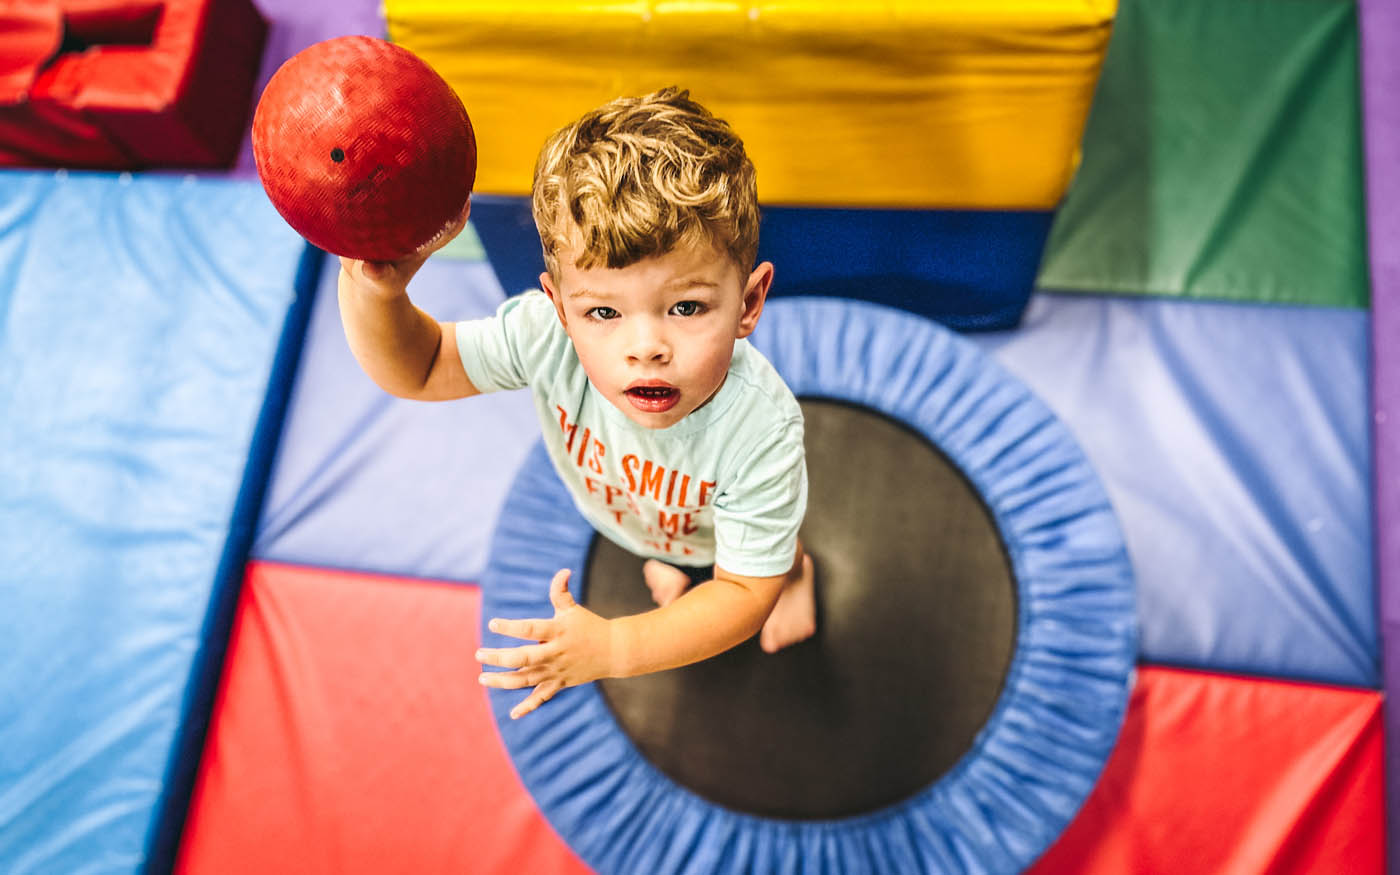 A toddler jumping on a Romp n' Roll tramp, learn more about our kids activities in Wethersfield, CT.